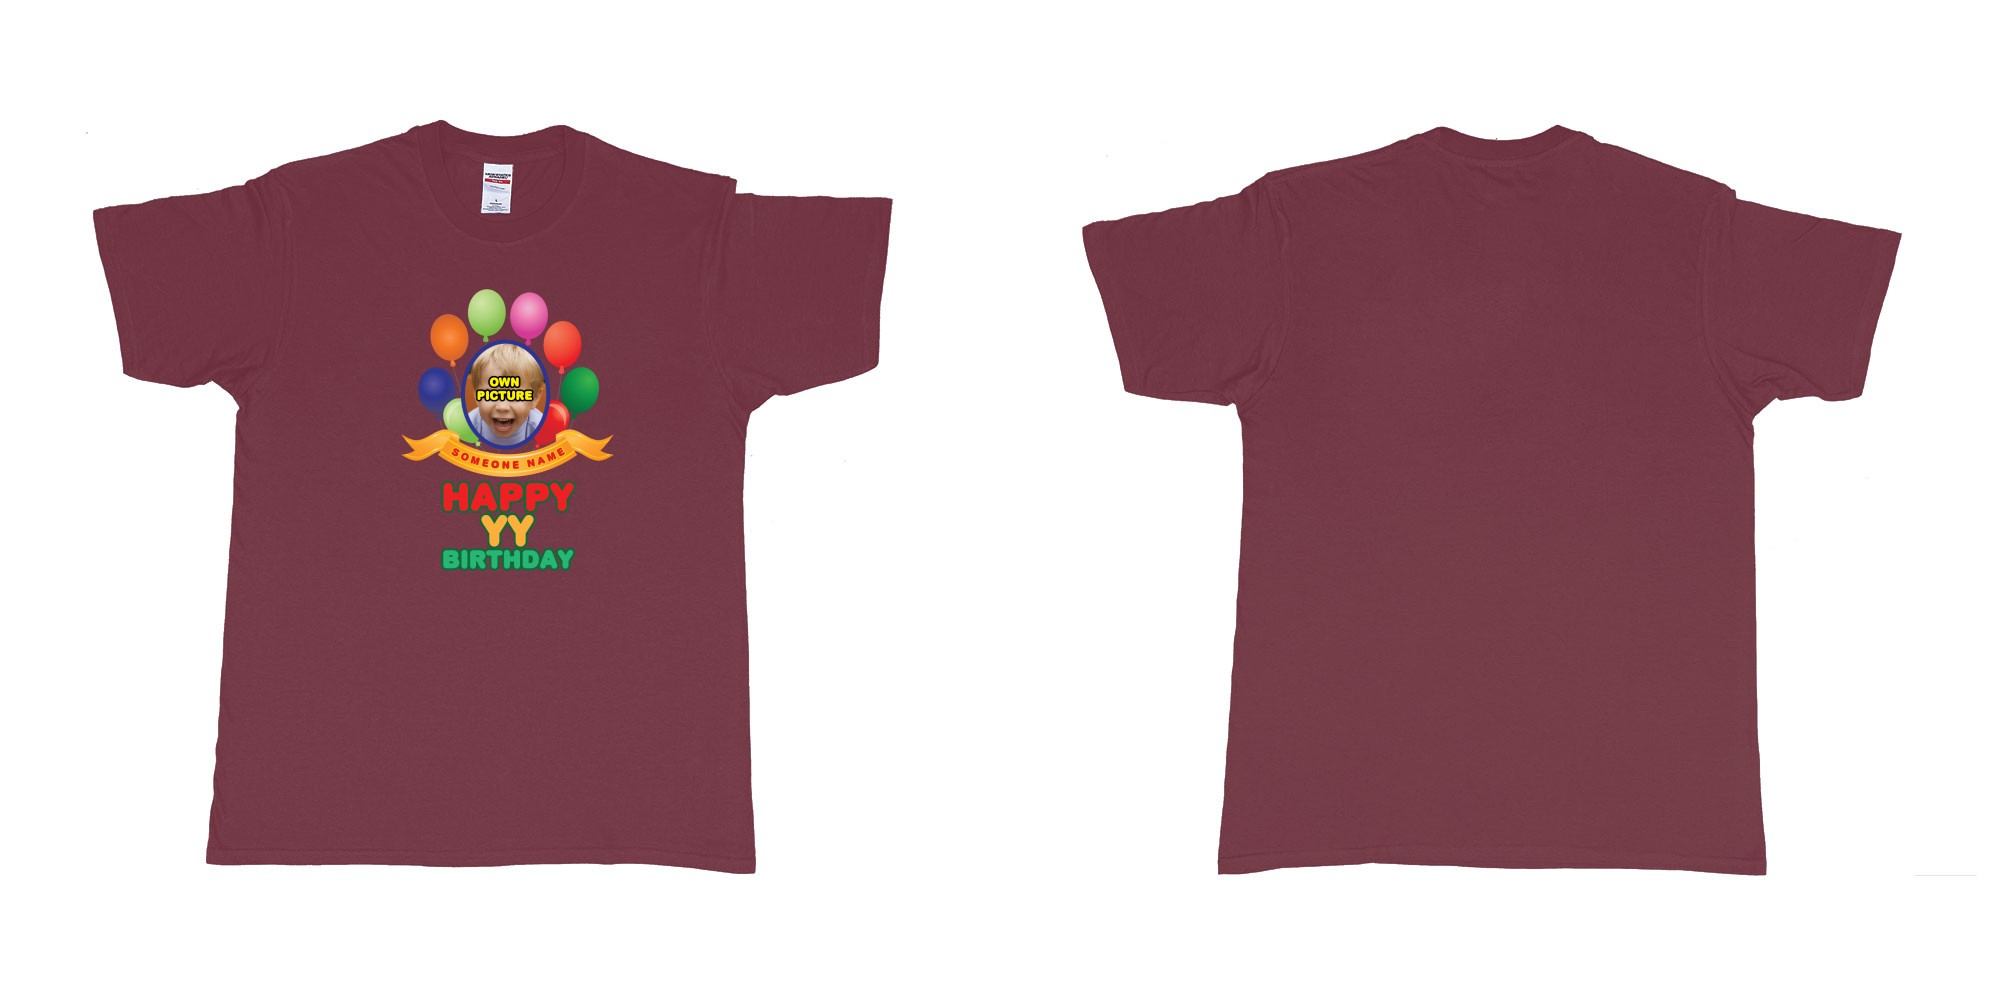 Custom tshirt design happy birthday balloon confetti custom name year t shirt printing bali in fabric color marron choice your own text made in Bali by The Pirate Way